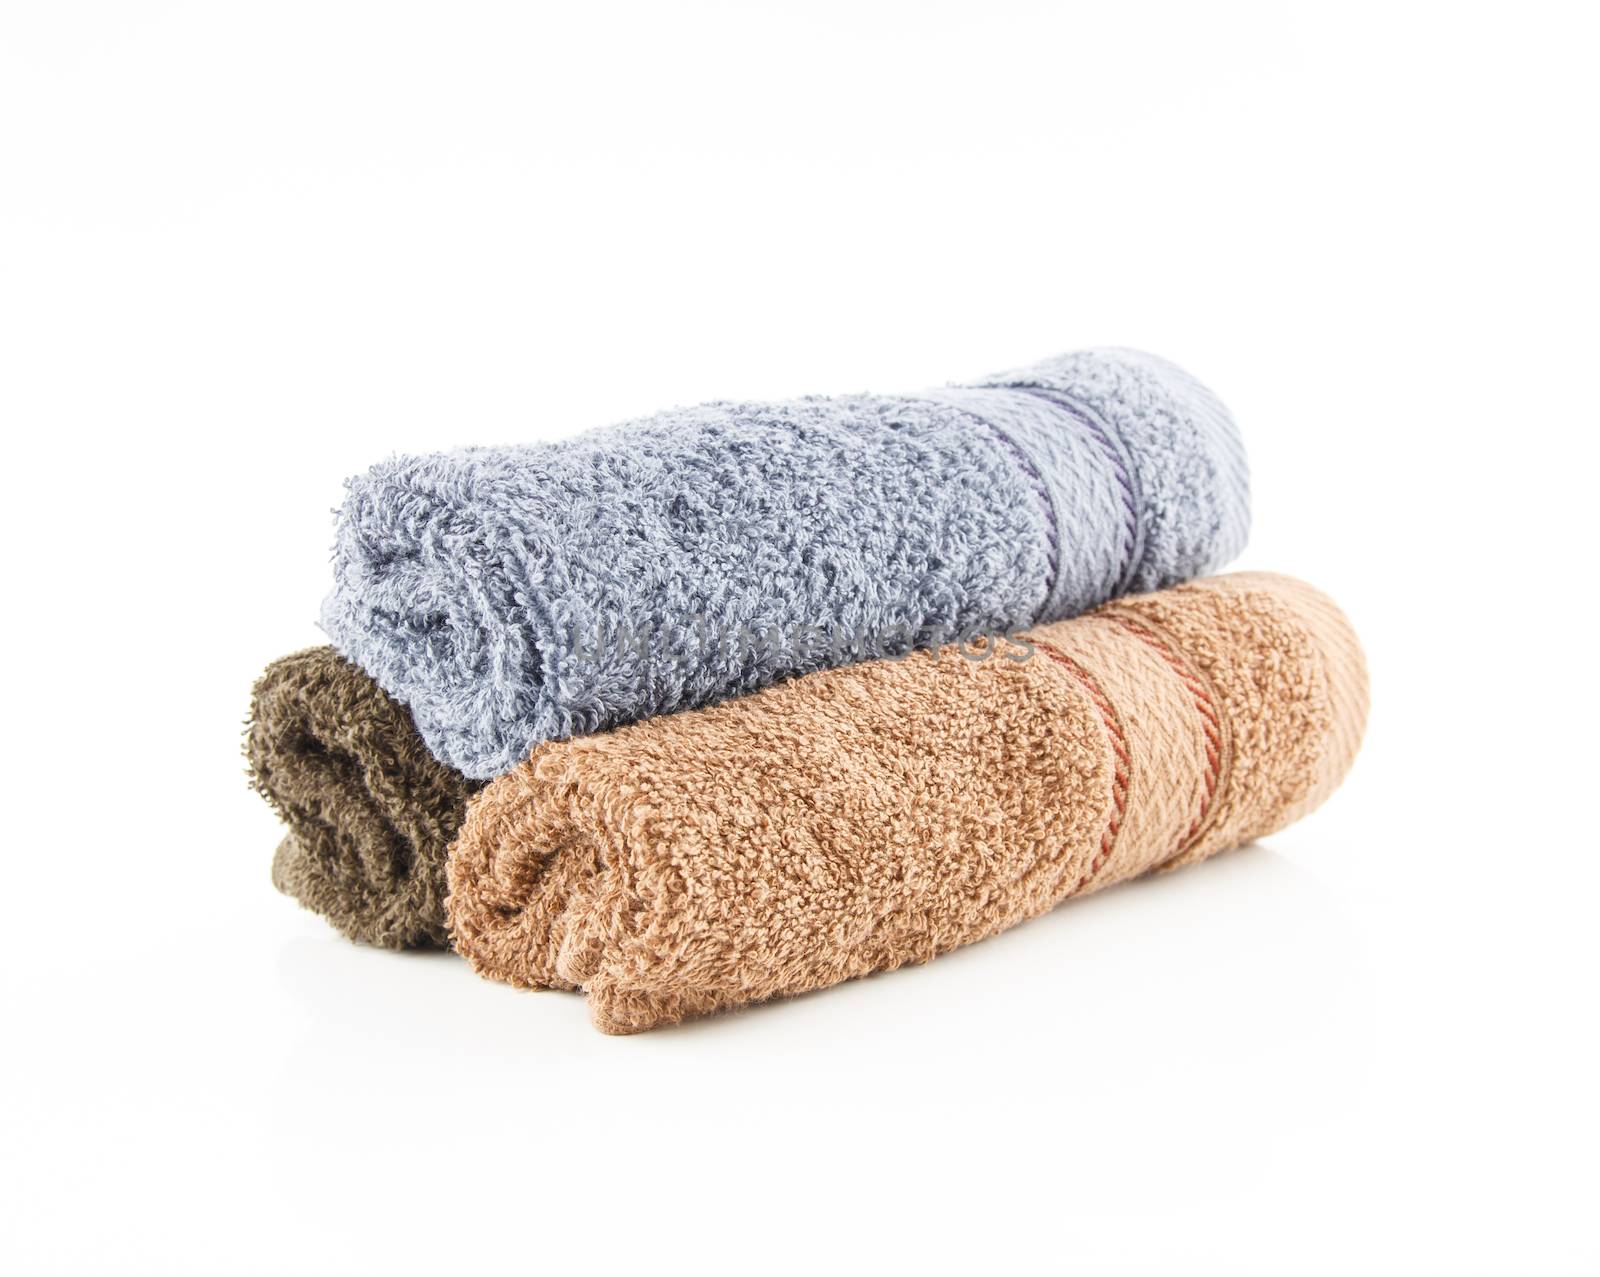 Stack of towels on white background by vitawin